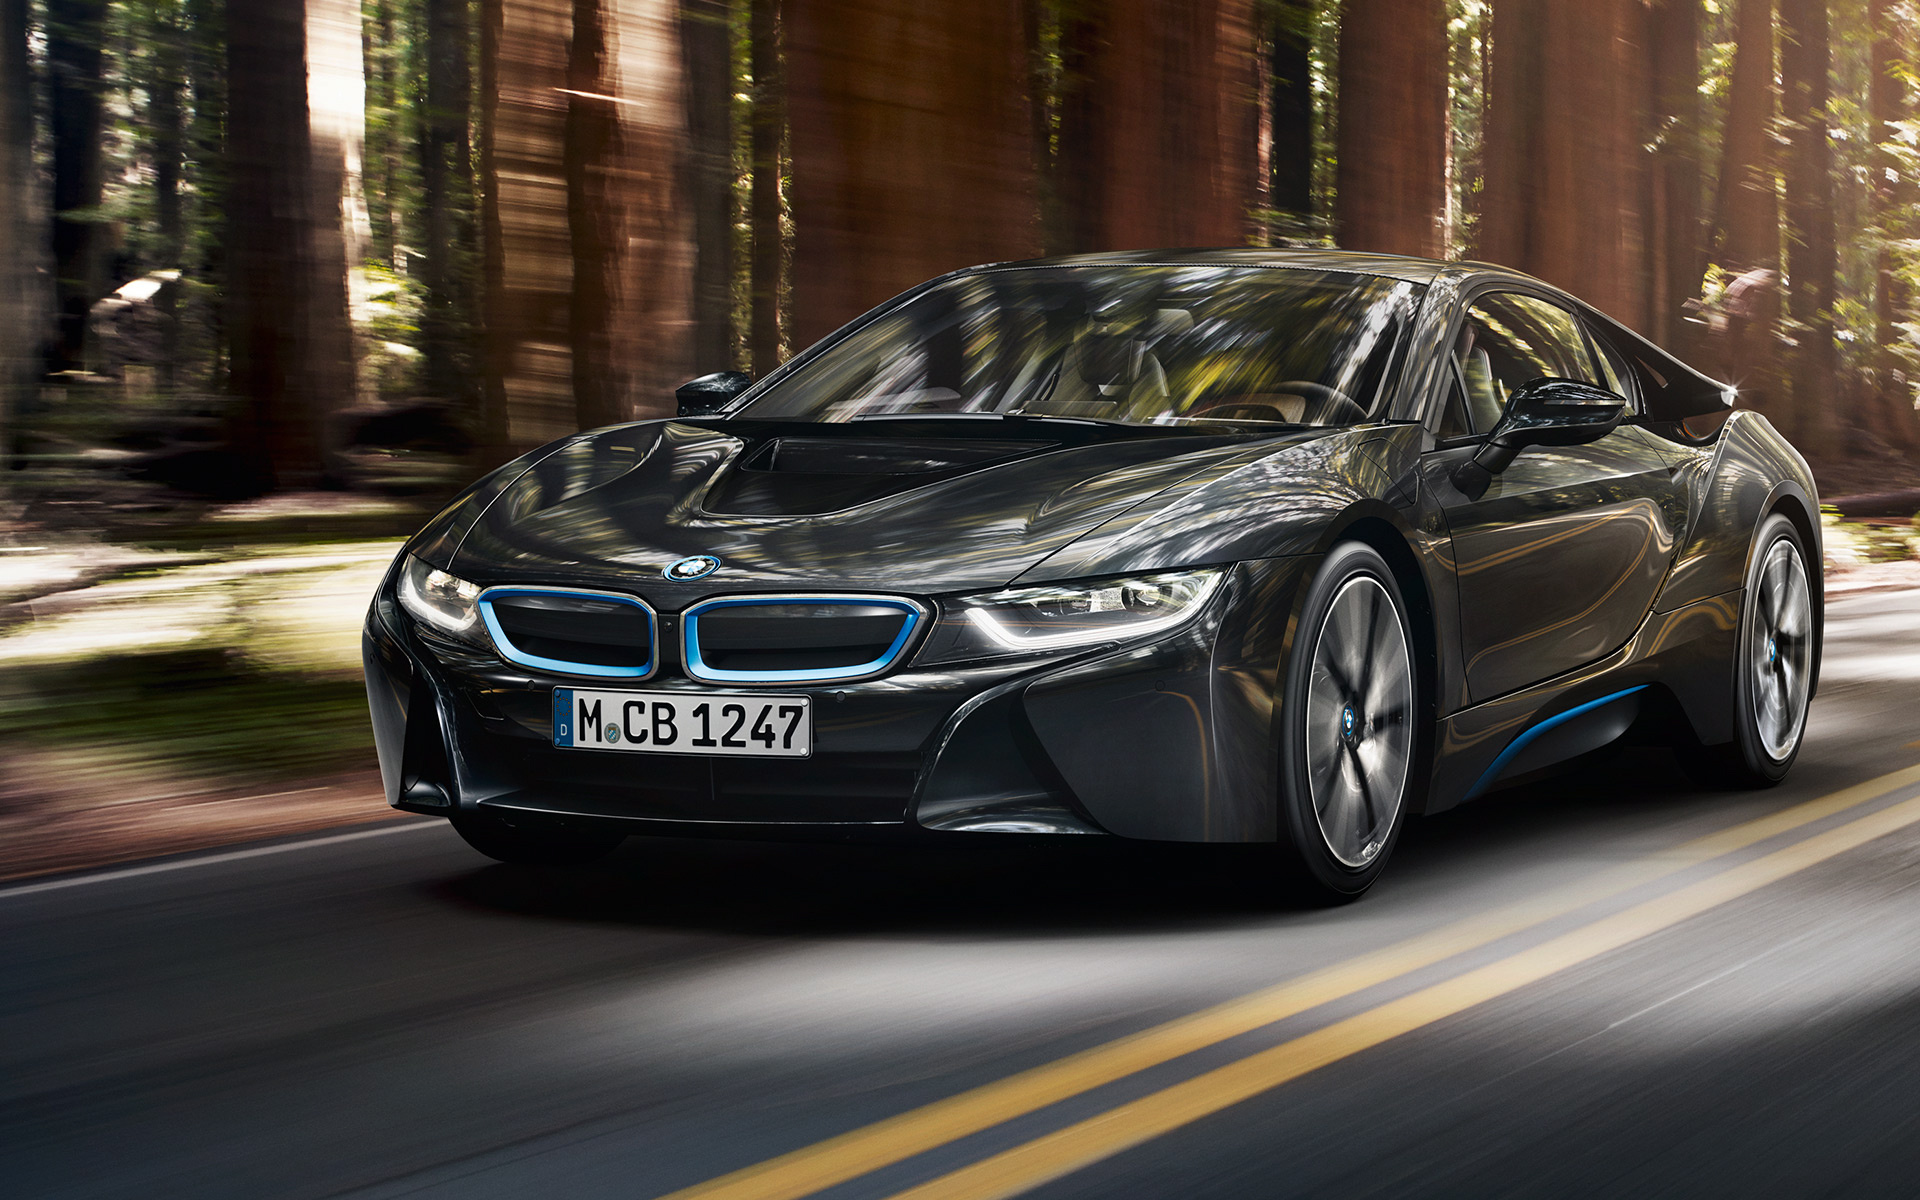 BMW i8 value drop, Pre-owned market, Reasons for decline, Market analysis, Investment considerations, 1920x1200 HD Desktop